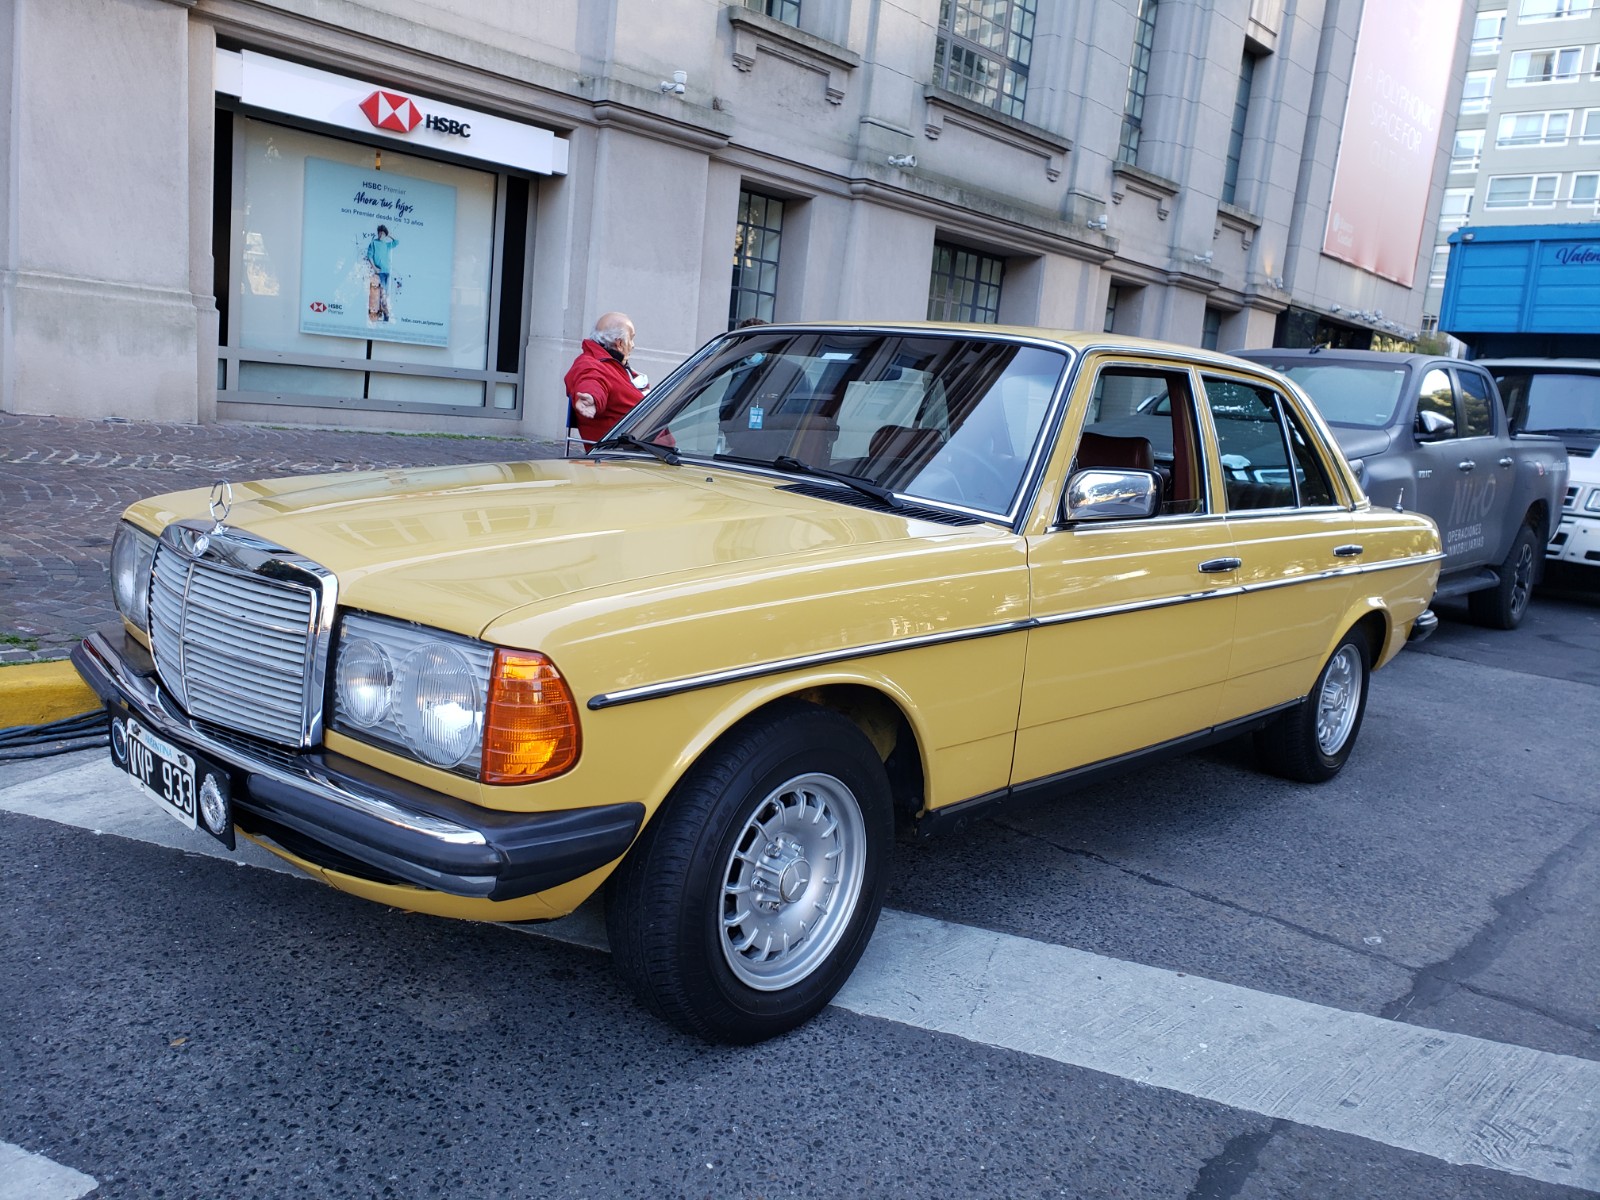 The yellow Mercedes Benz of the 80s was the main setting for Robert De Niro's early scenes with Luis Brandoni